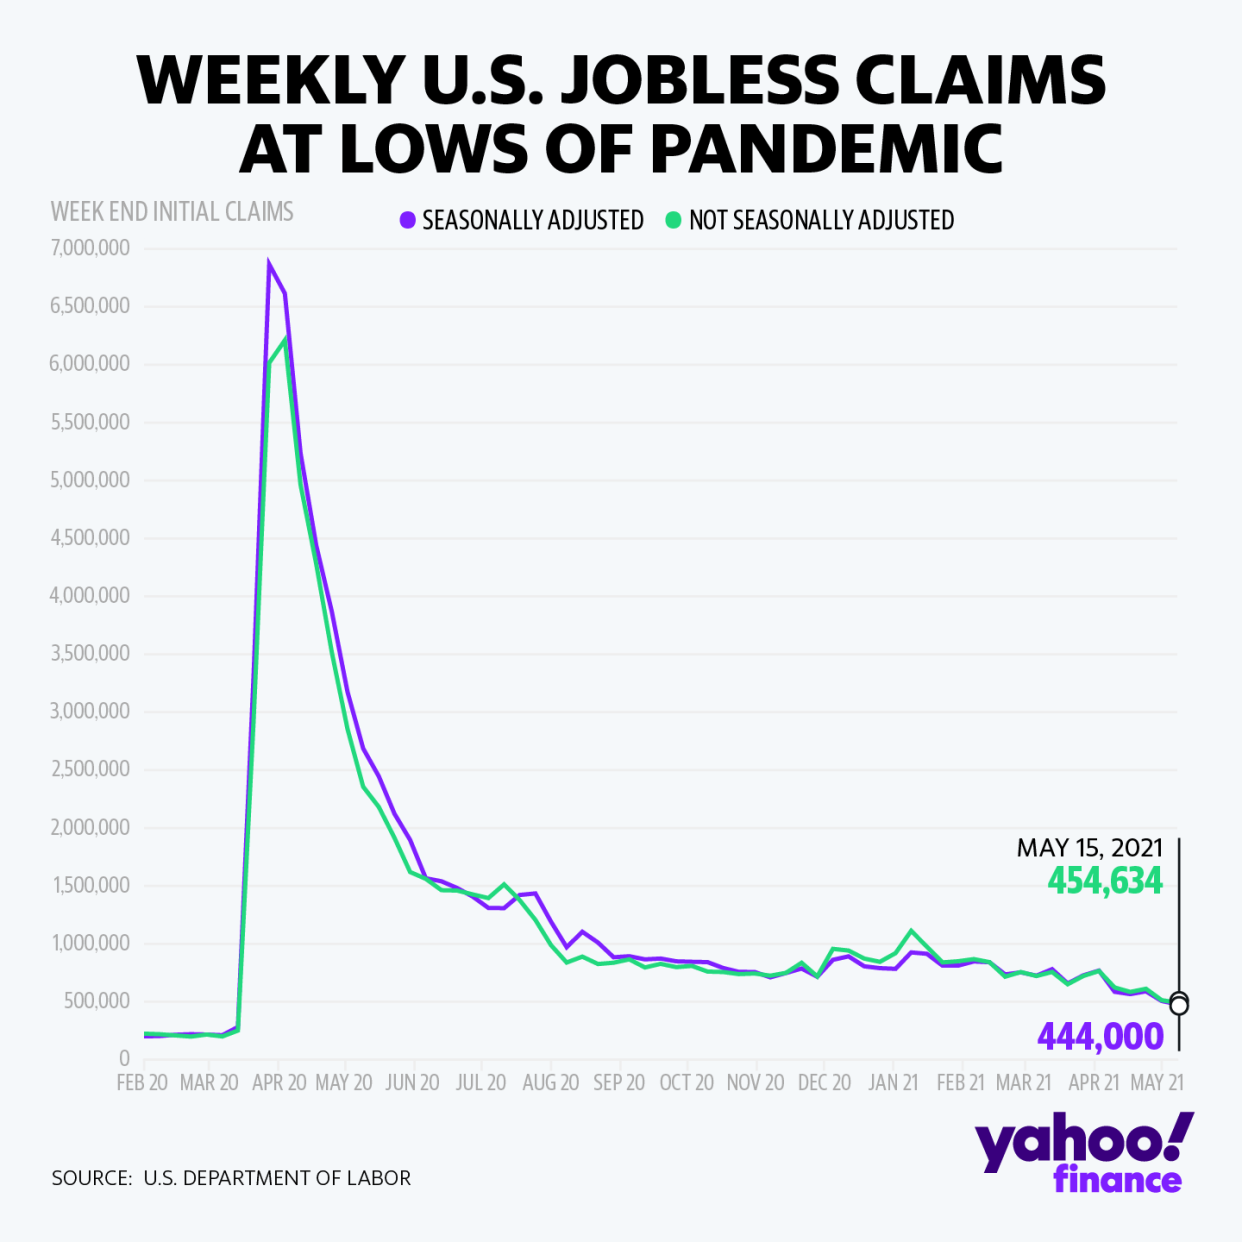 The Labor Department said weekly unemployment claims are at their lowest levels in more than a year.